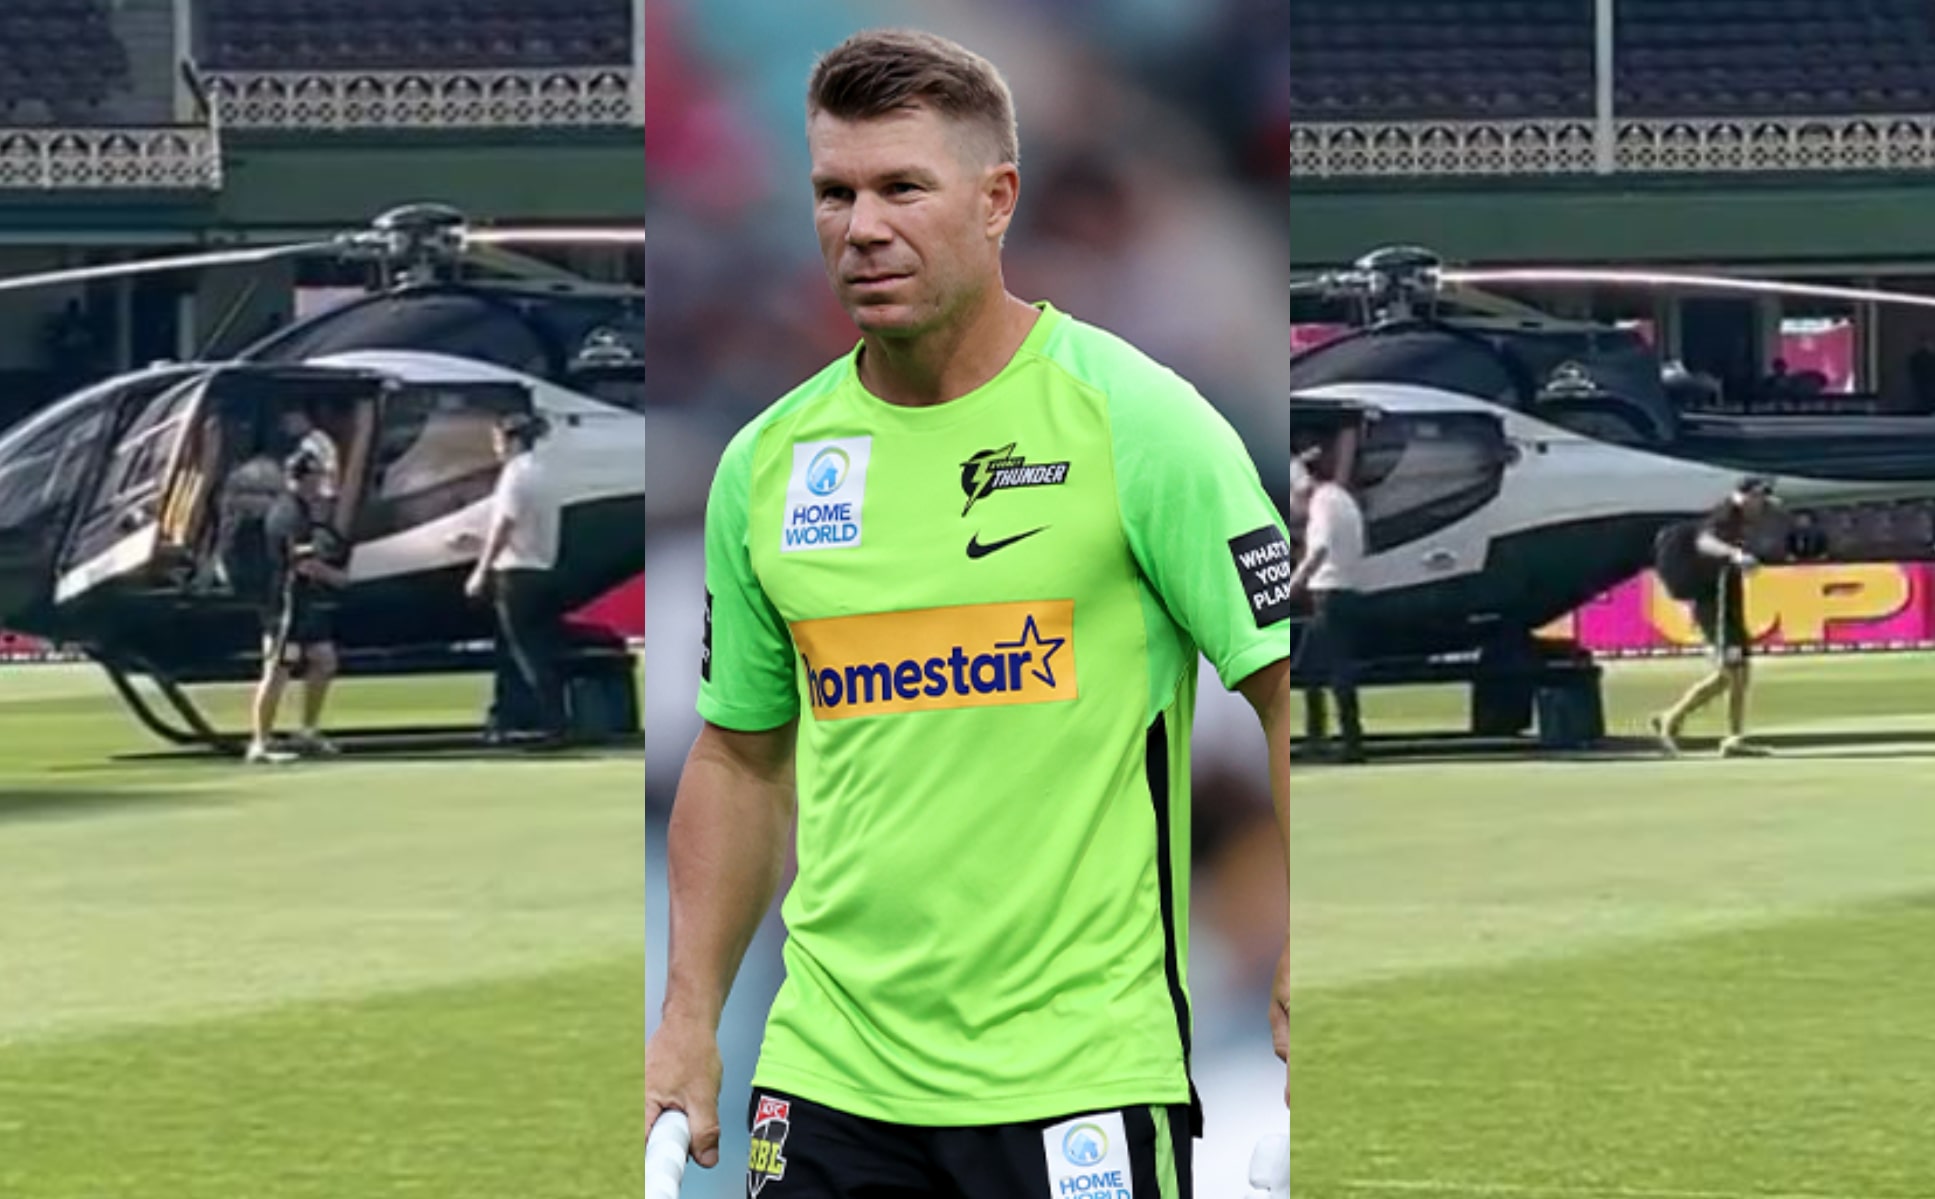 Warner arrives in SCG in a helicopter | X